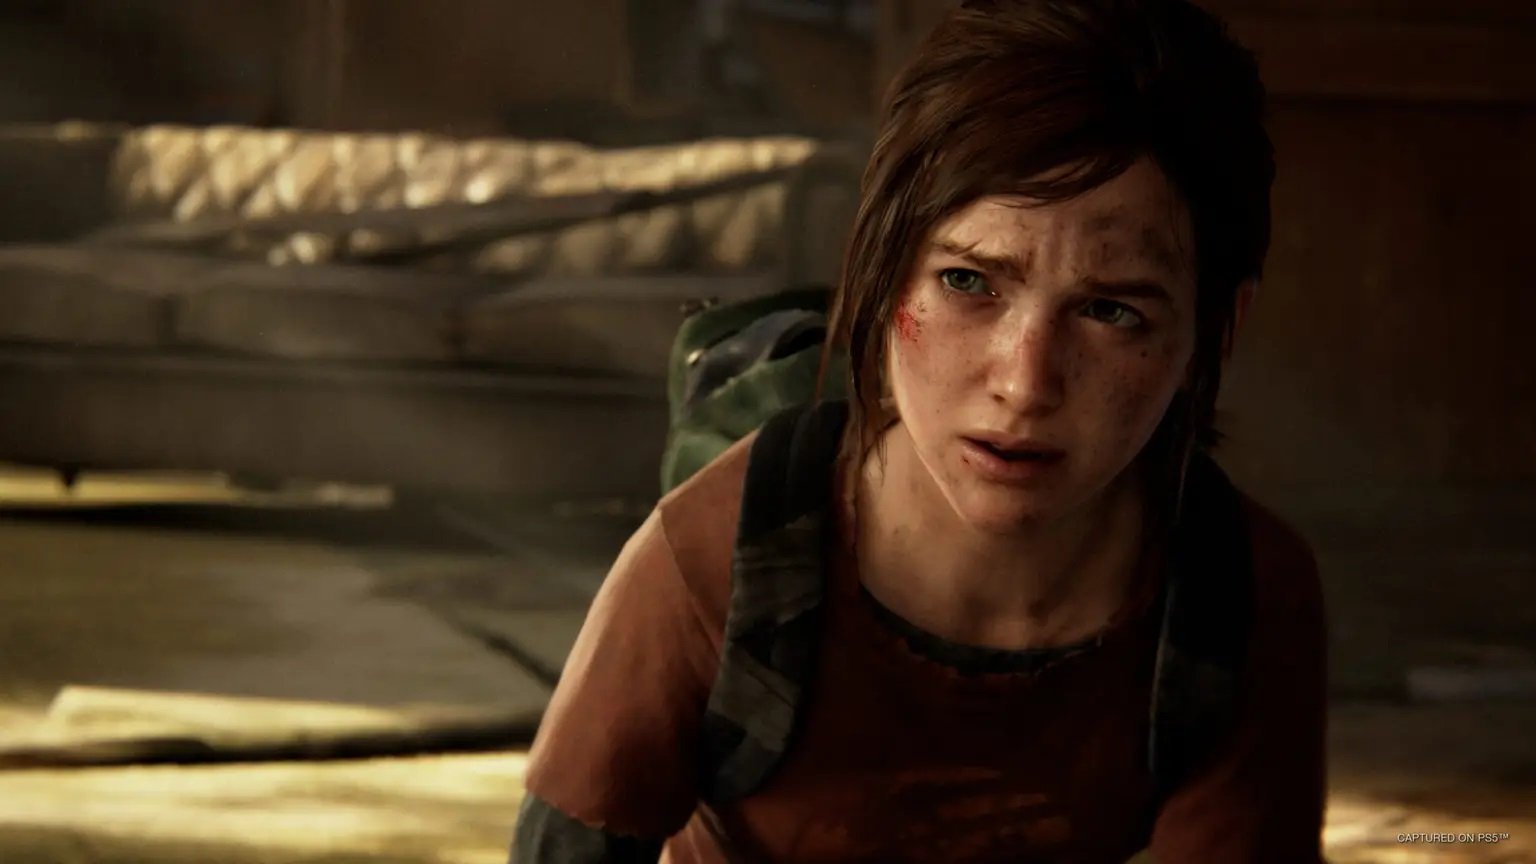 Play The Last of Us Part One on PC Now! - Overclockers UK